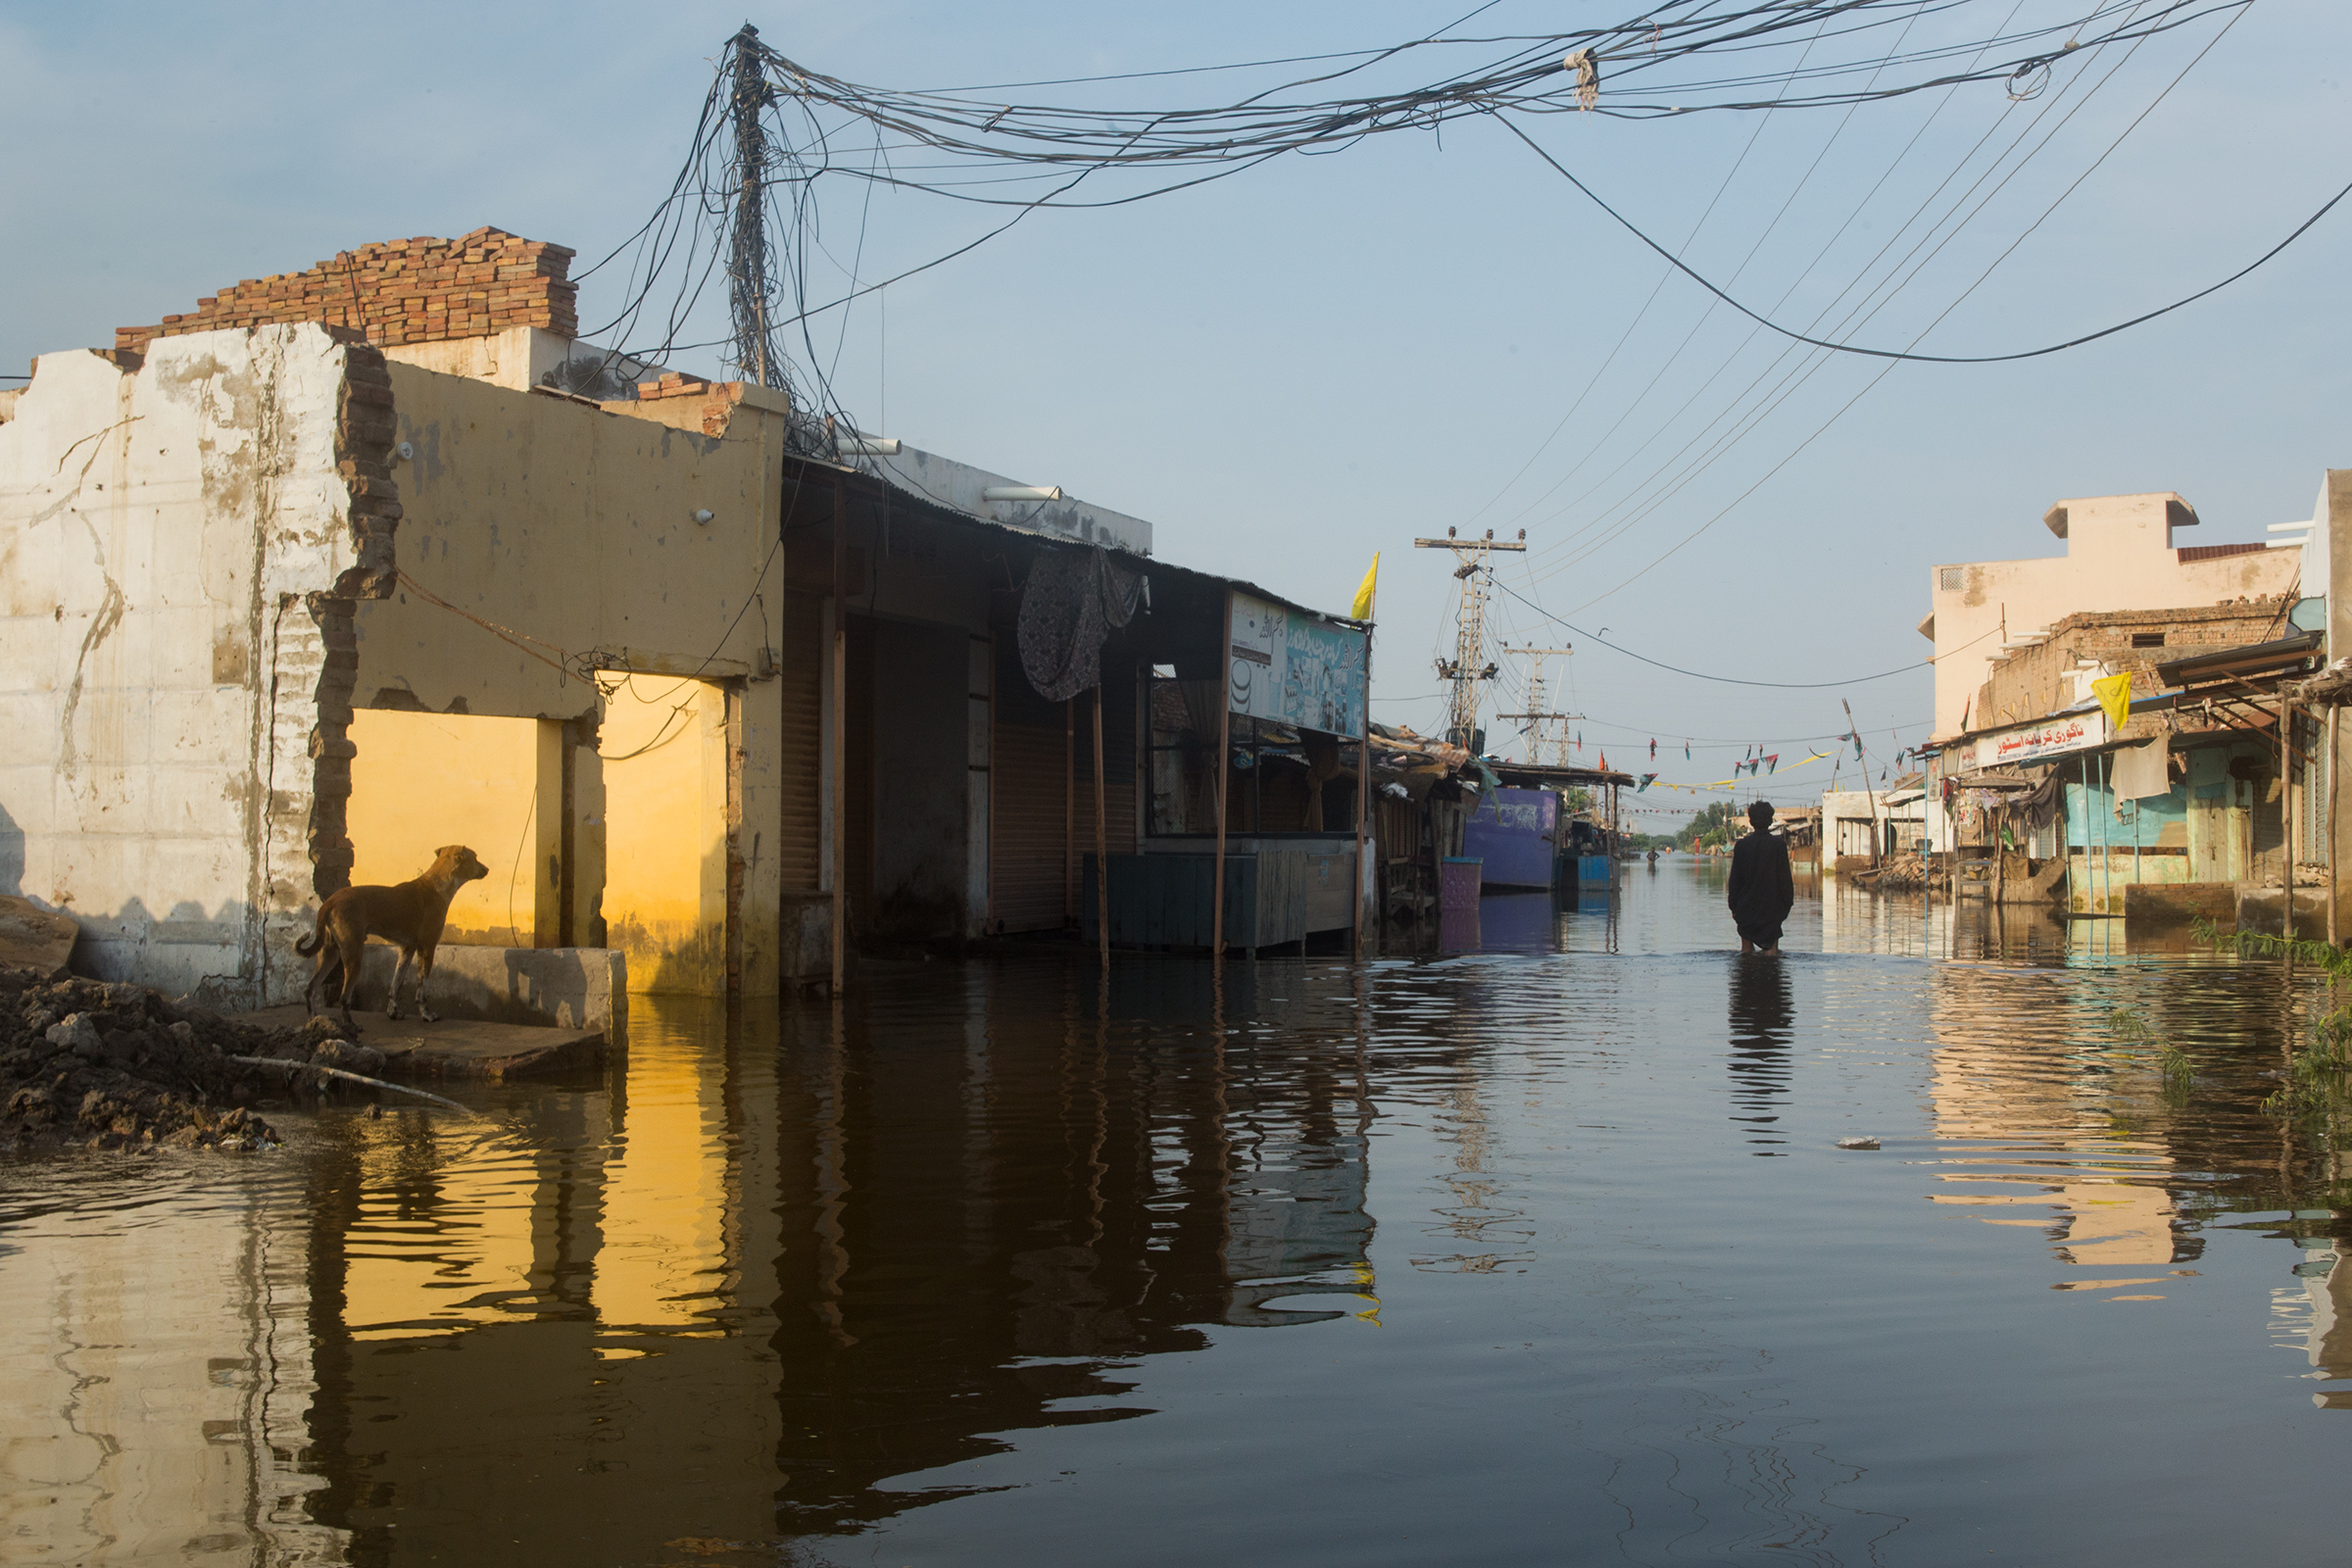 A flooded bazaar in Jhuddo, Sindh province, Pakistan